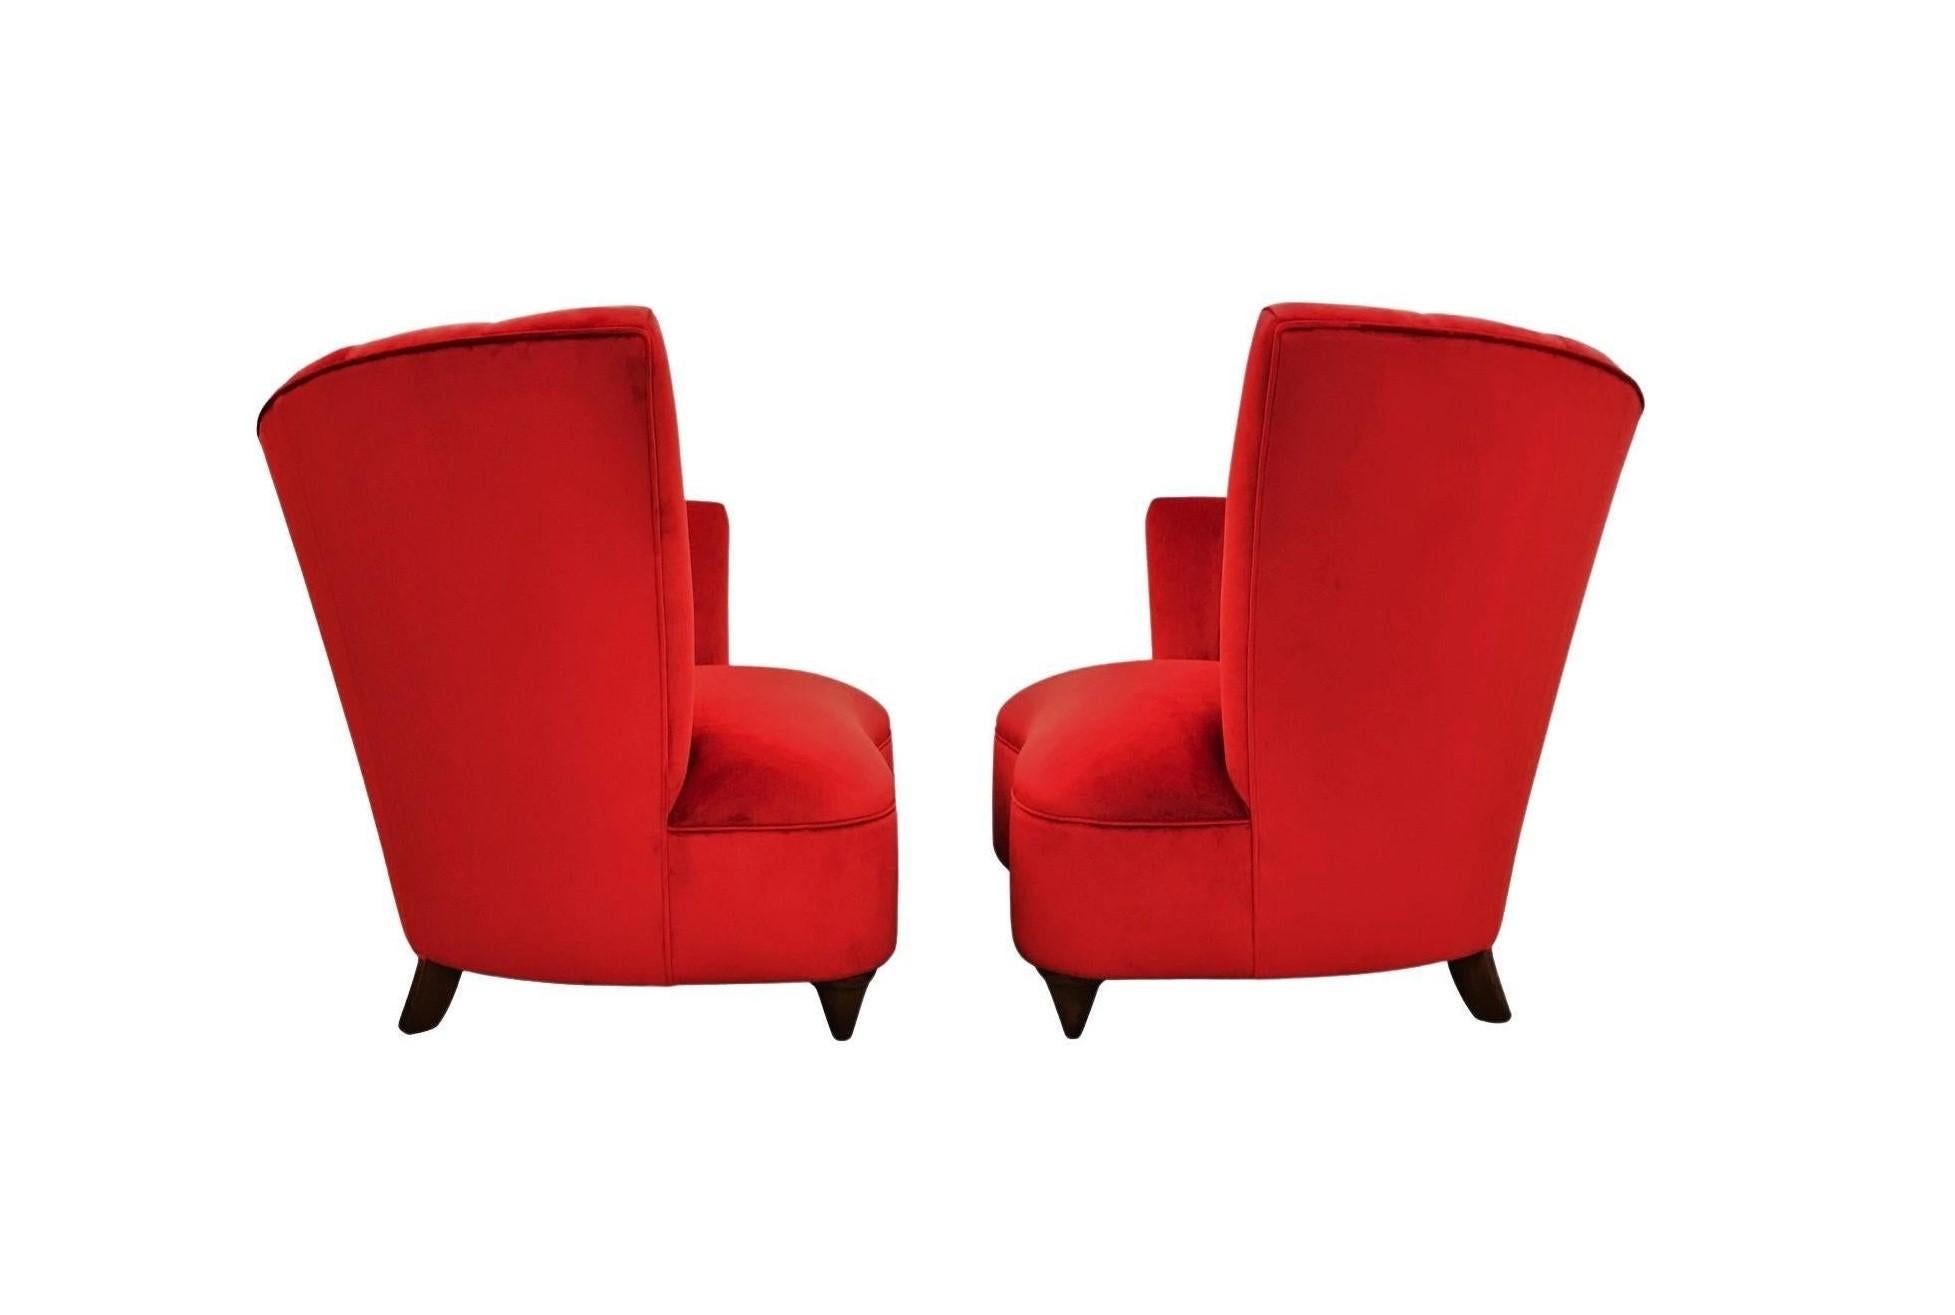 Mid-20th Century Hollywood Regency Scalloped Asymmetrical Red Velvet Chairs For Sale